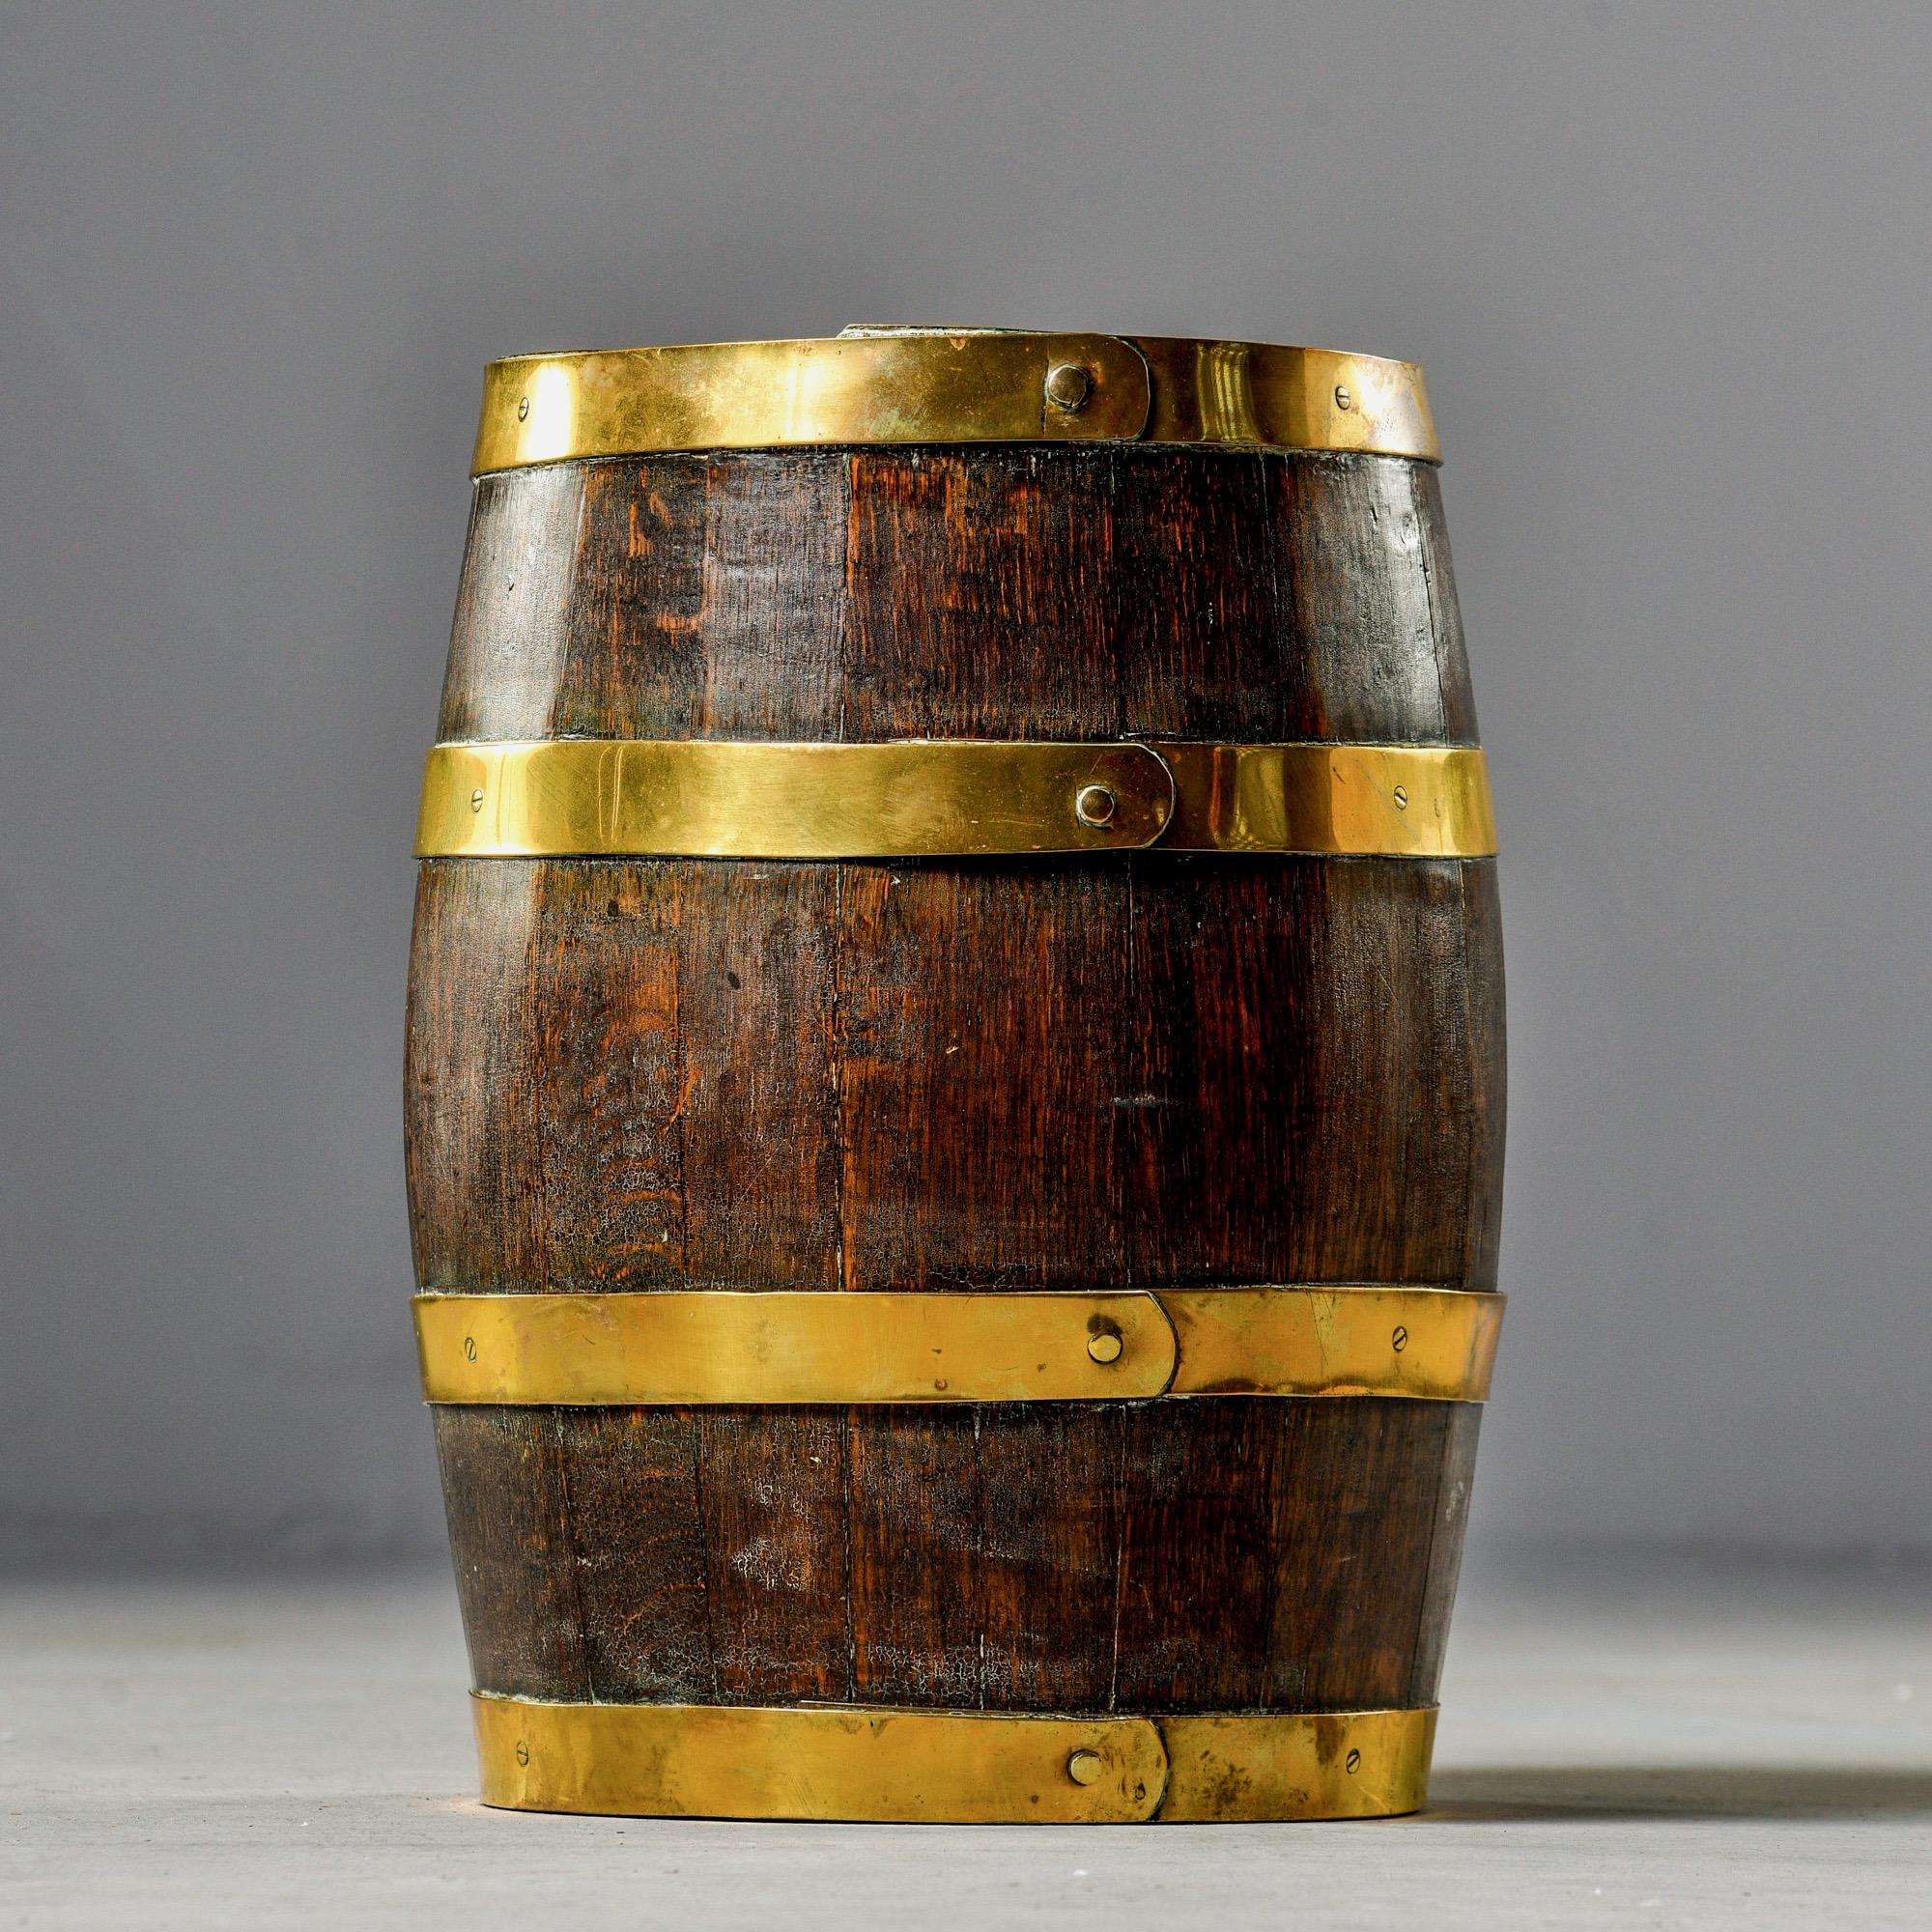 Rustic Antique English Dark Oak Barrel with Brass Bands For Sale